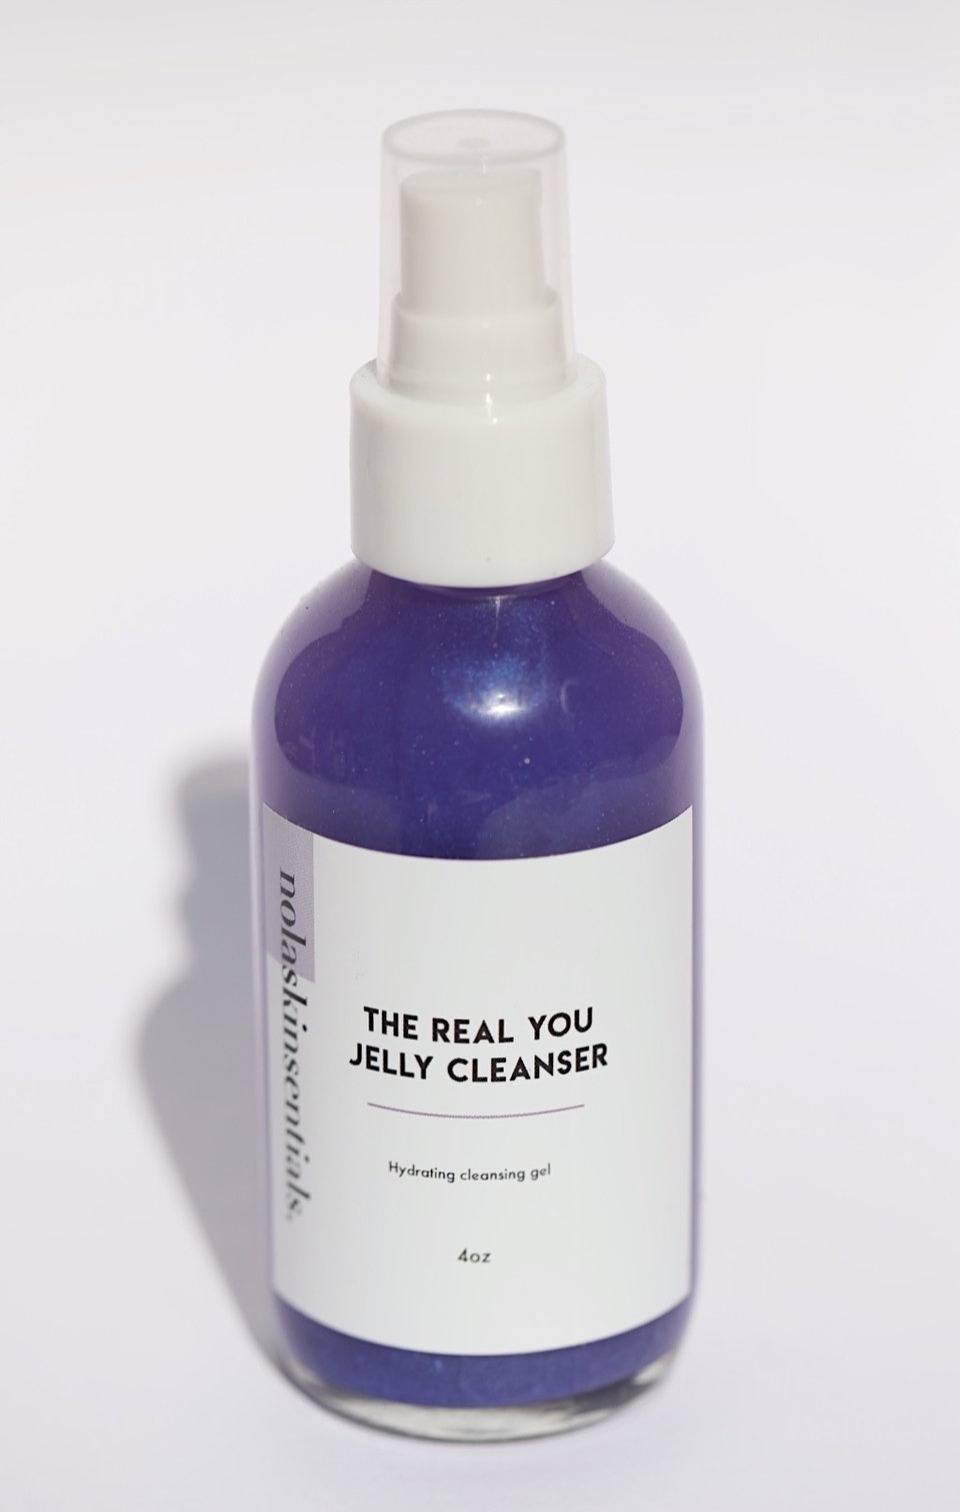 Nolaskinsentials The Real You Jelly Cleanser